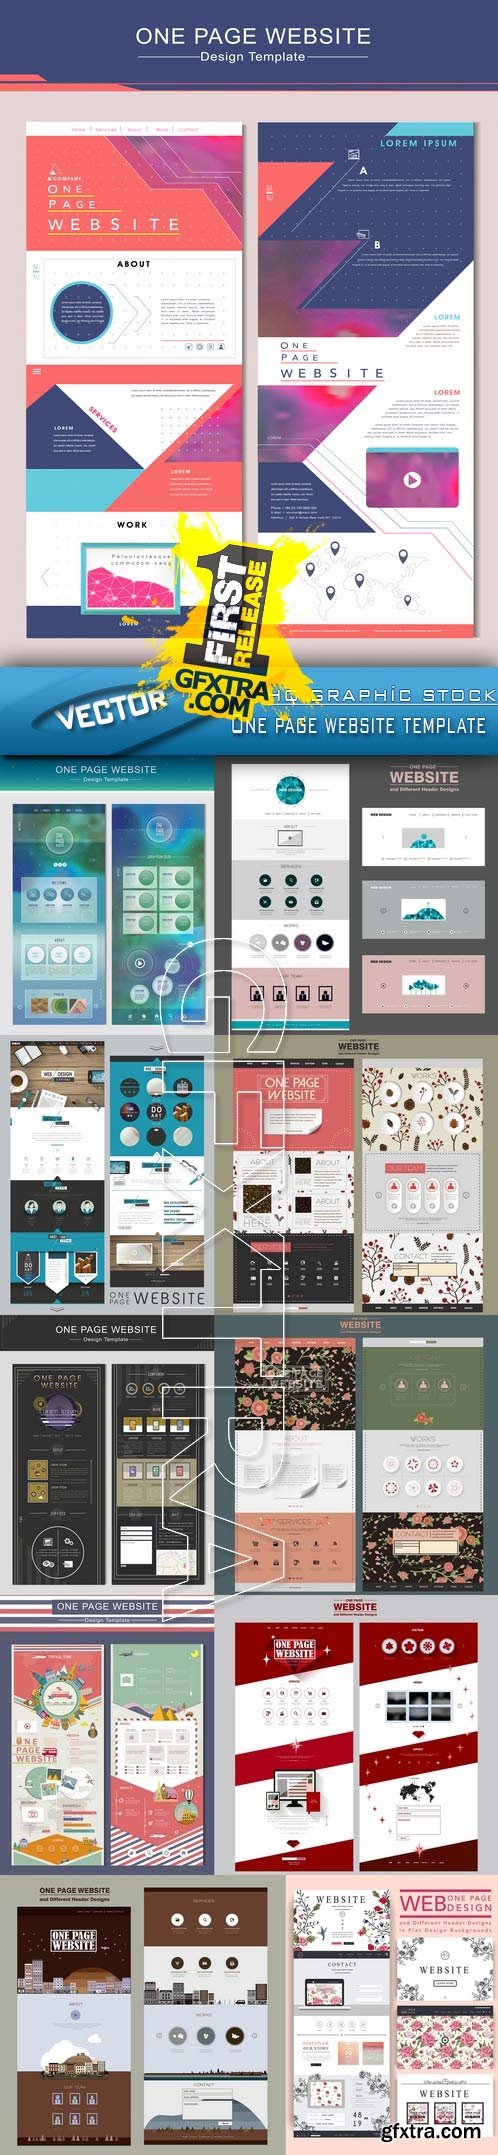 Stock Vector - One page website template